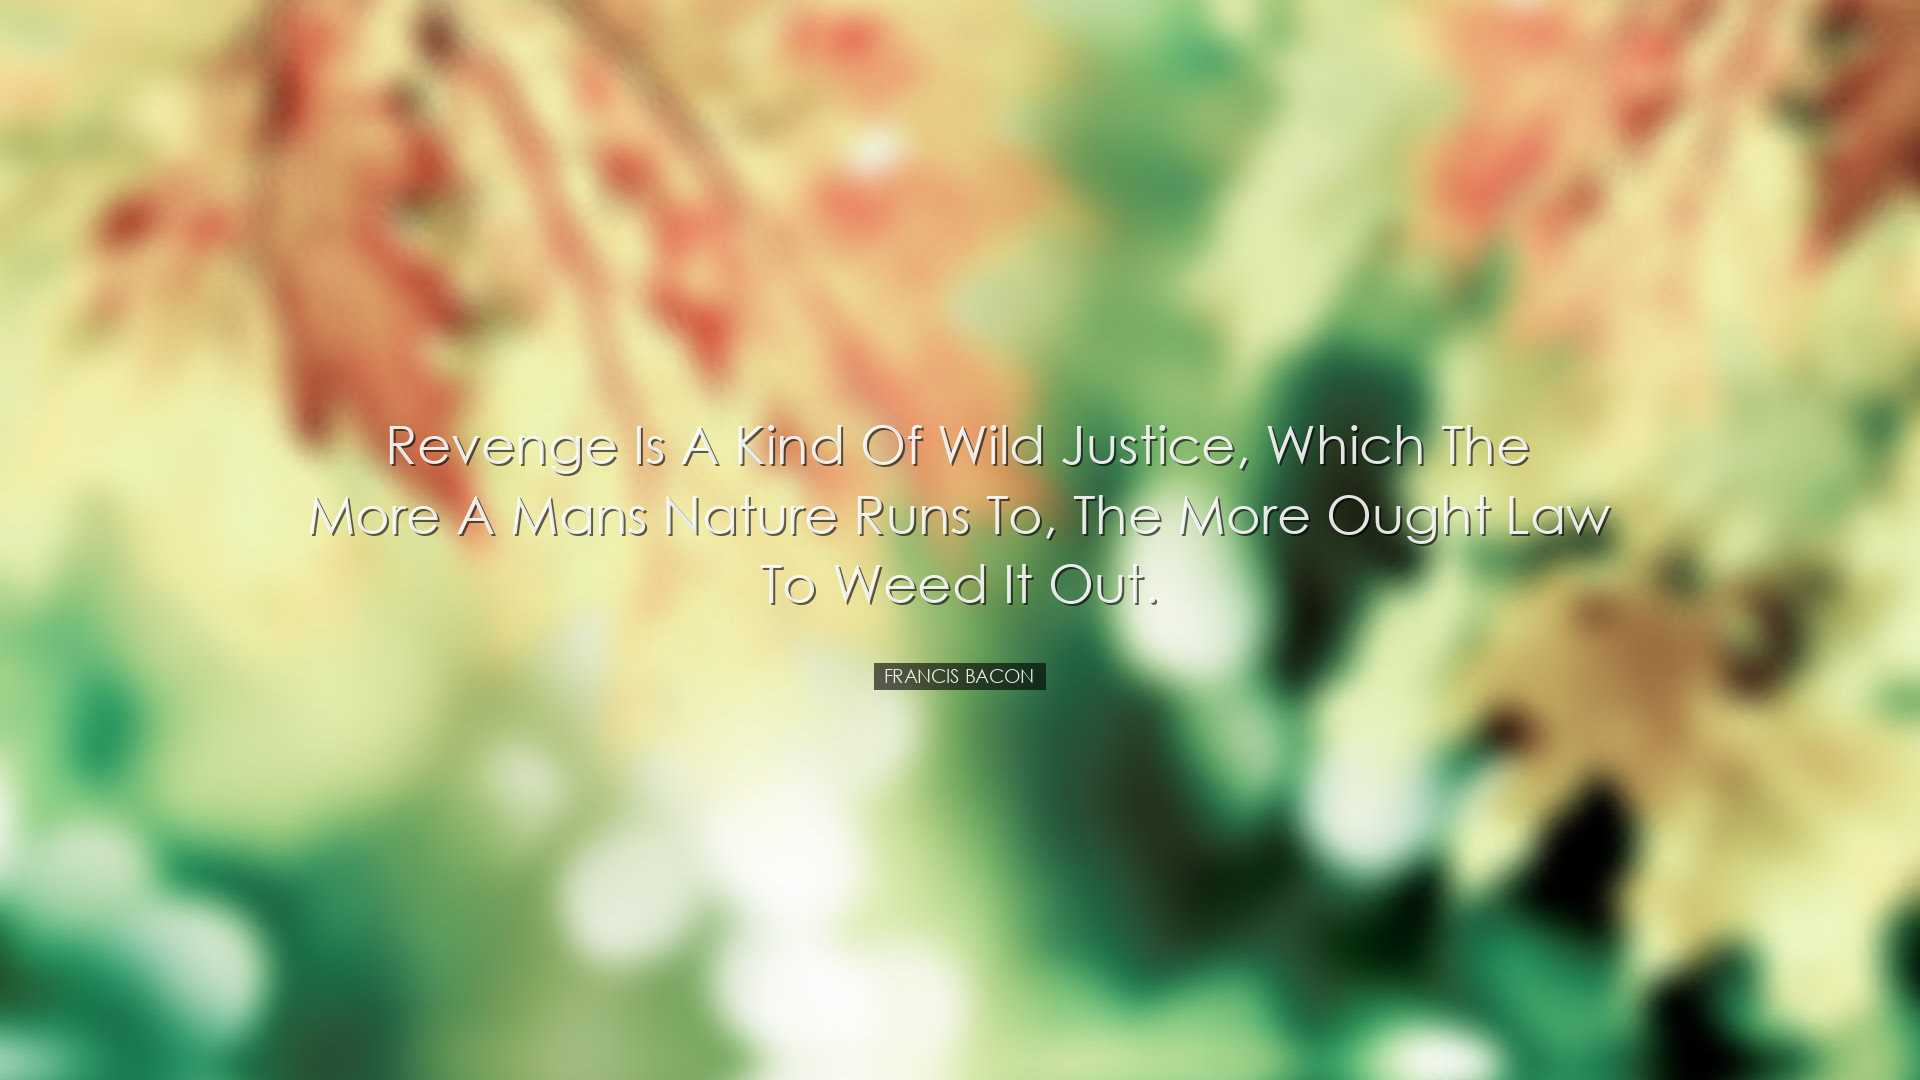 Revenge is a kind of wild justice, which the more a mans nature ru